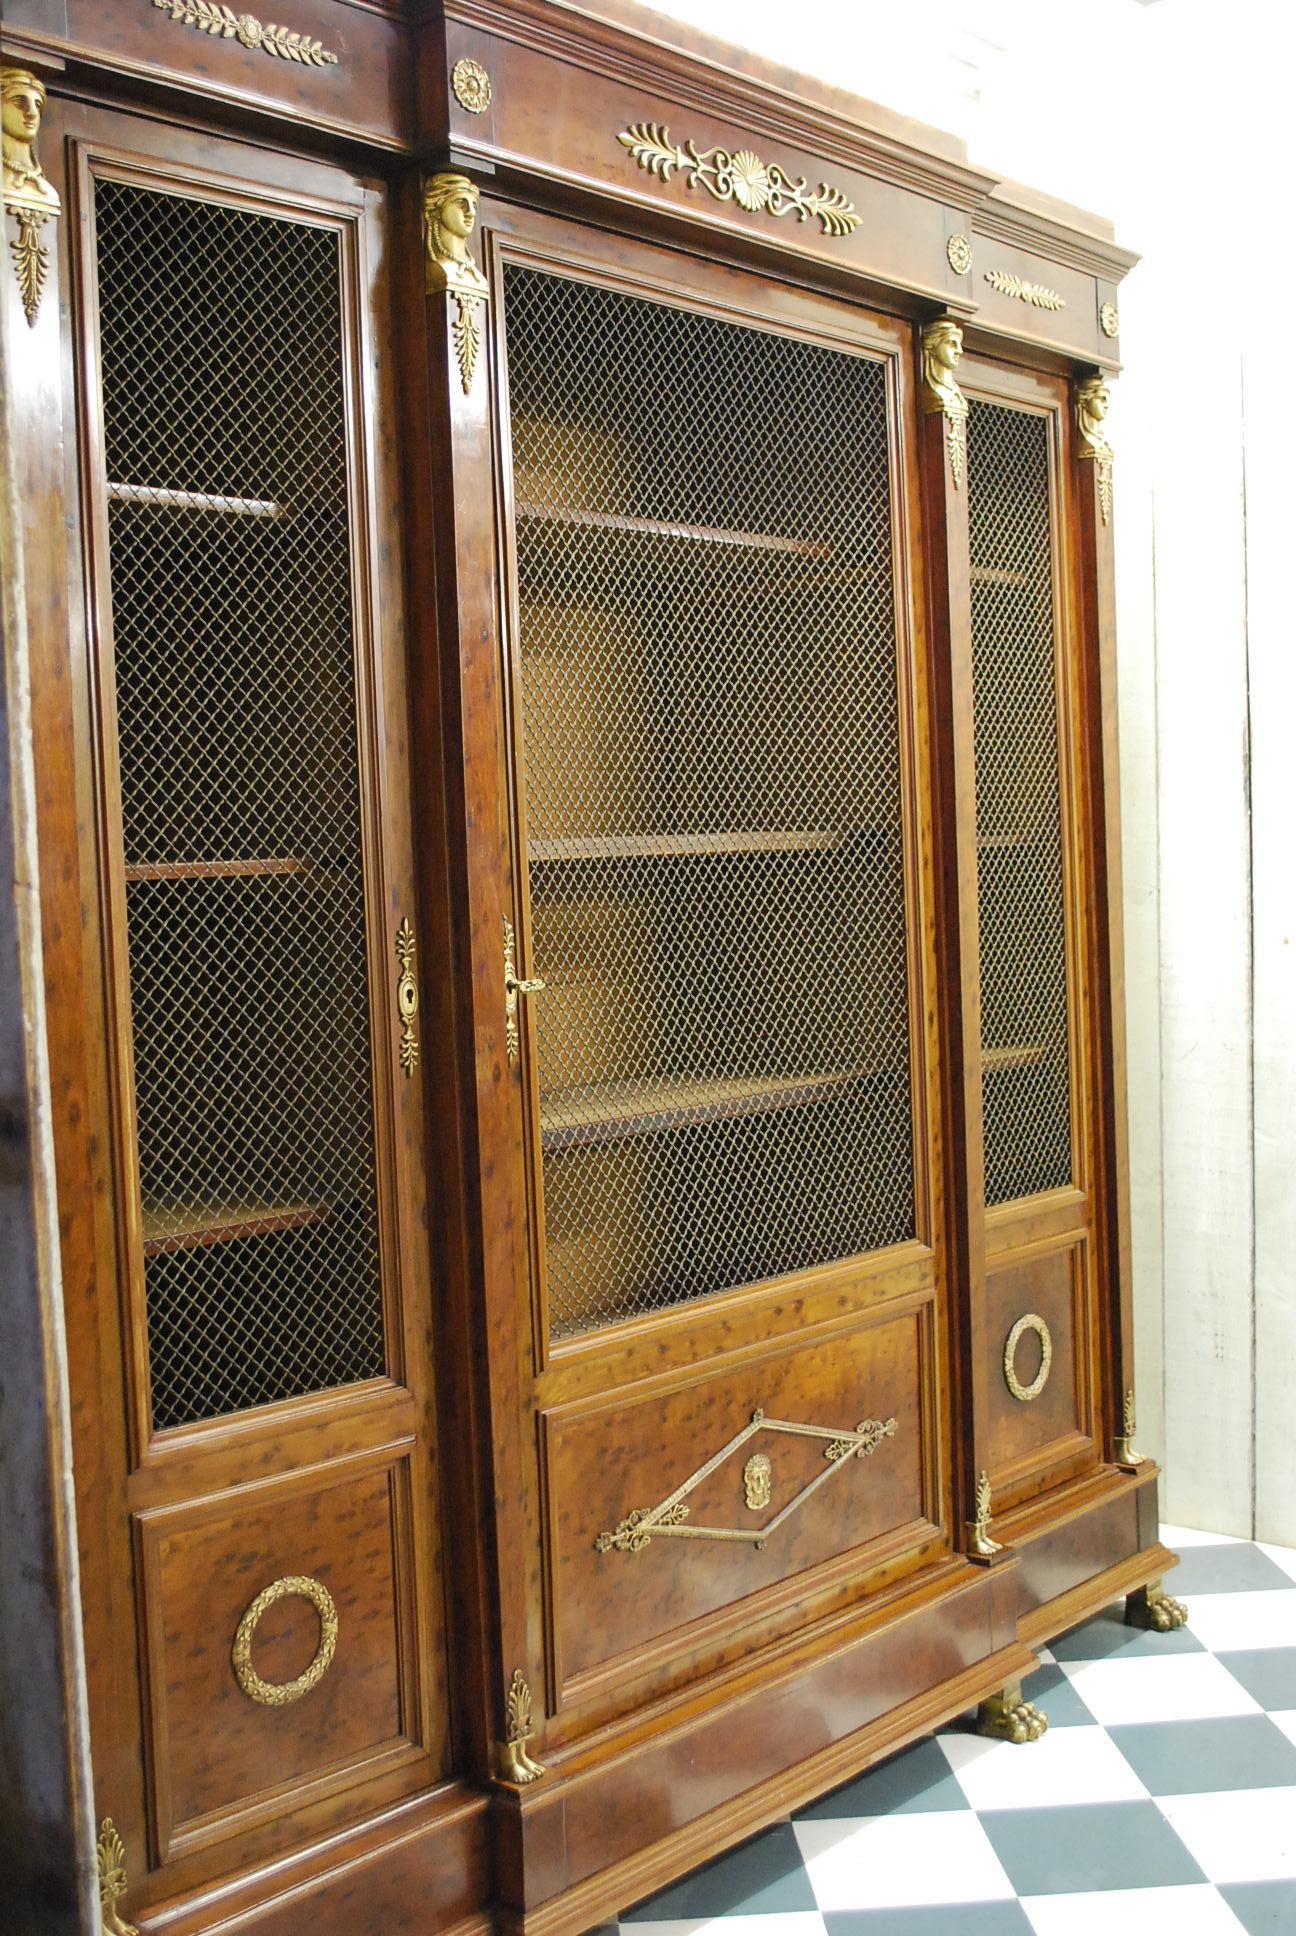 Antique Mahogany French Empire Period Breakfront Bookcase or Bibliotheque For Sale 2